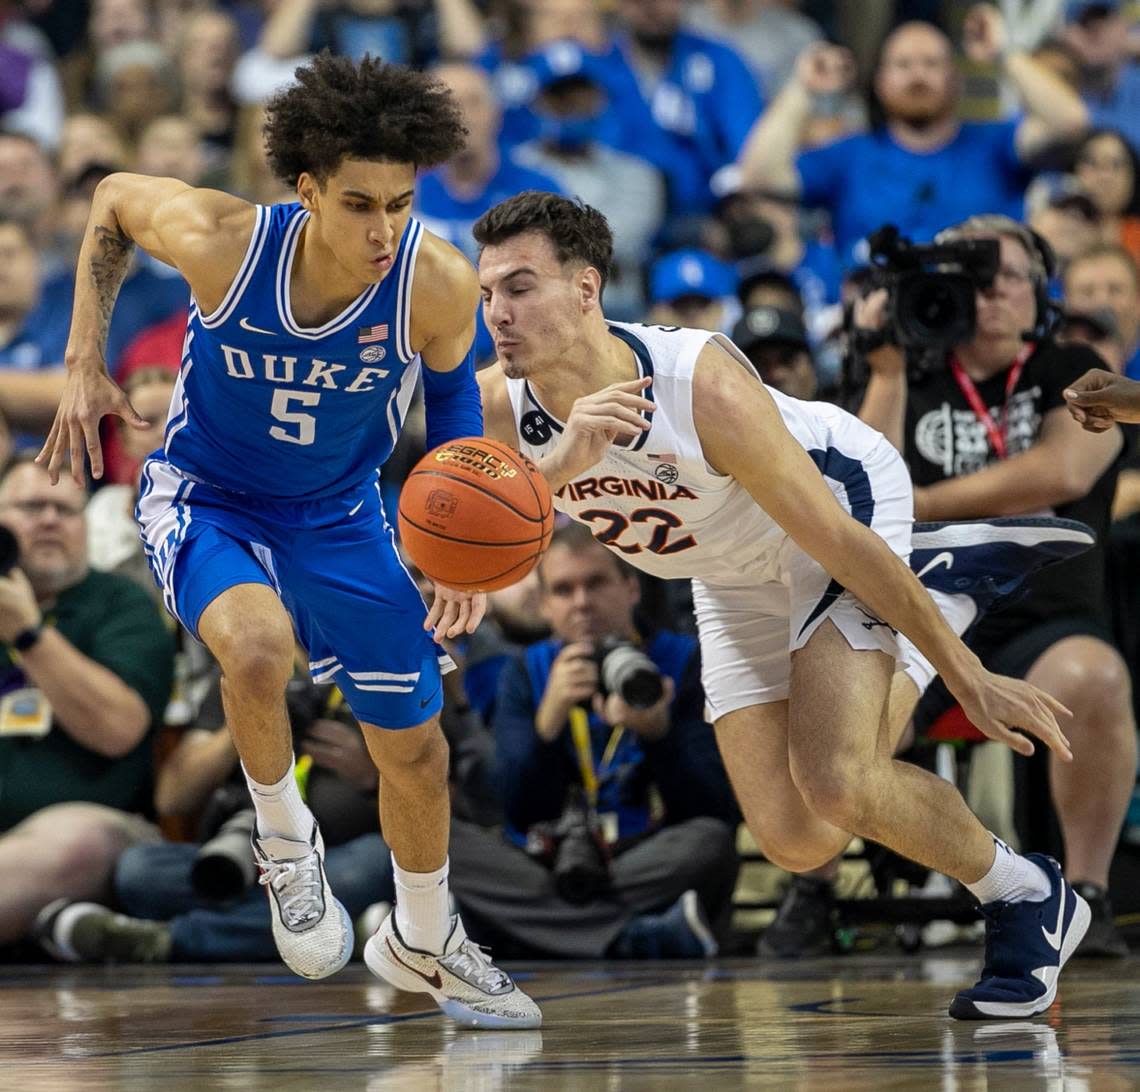 Duke’s Tyrese Proctor (5) makes a steal from Virginia’s Francisco Caffaro (22) during the first half in the championship game of the ACC Tournament on Saturday, March 11, 2023 at the Greensboro Coliseum in Greensboro, N.C